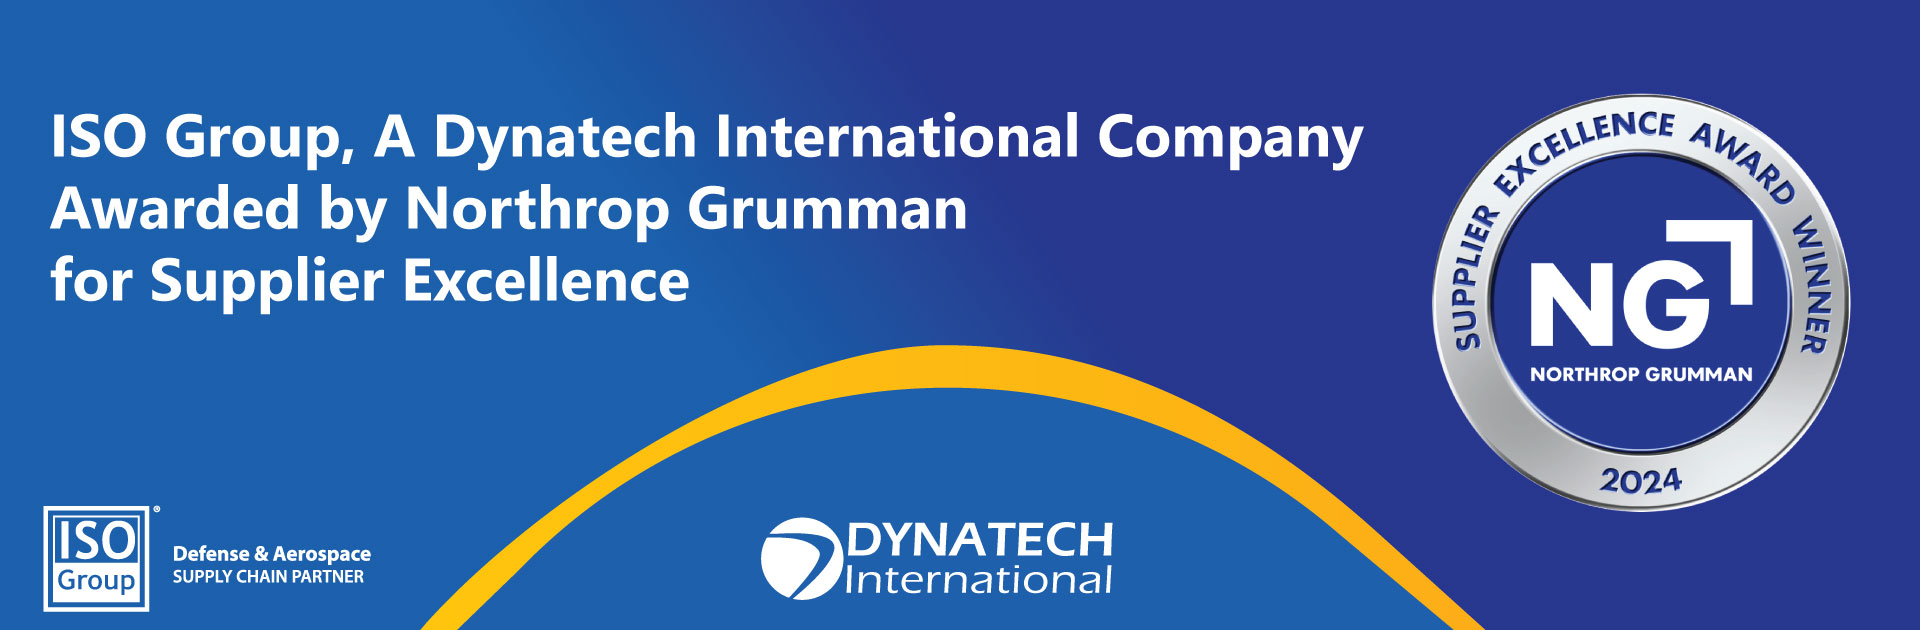 ISO Group Awarded by Northrop Grumman for Supplier Execellence.